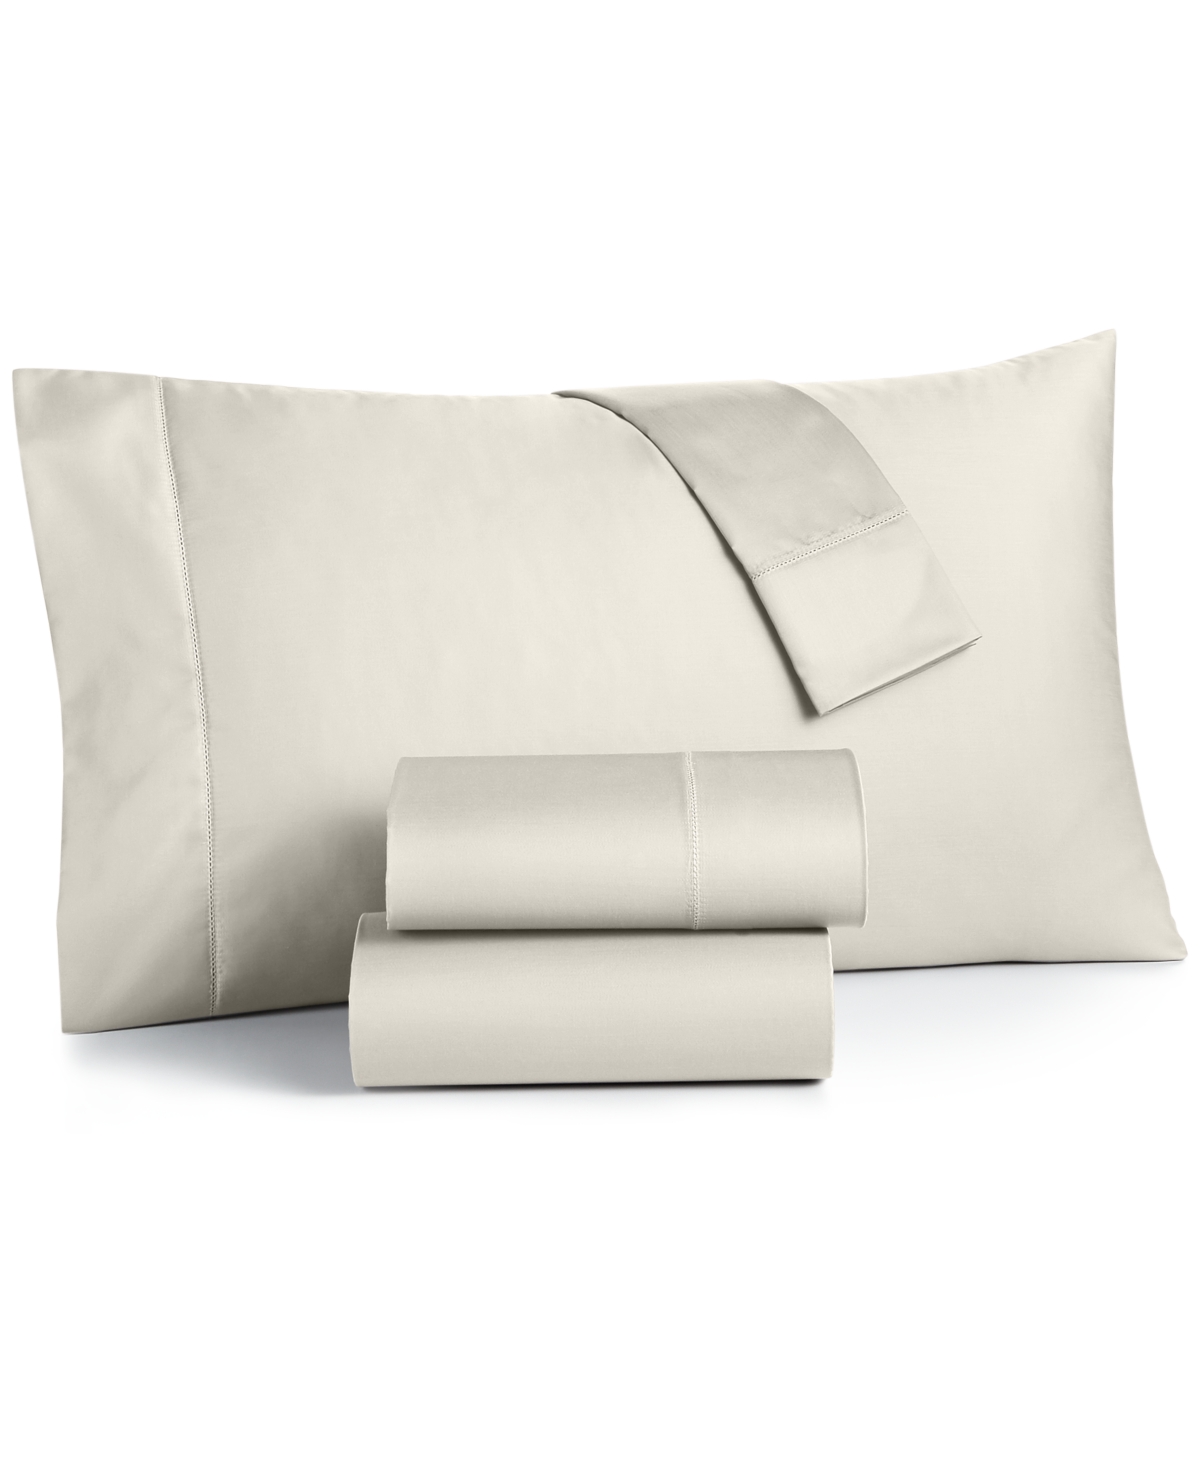 Charter Club Damask Solid Extra Deep Pocket 550 Thread Count 100% Cotton 4-pc. Sheet Set, California King, Create In Ivory